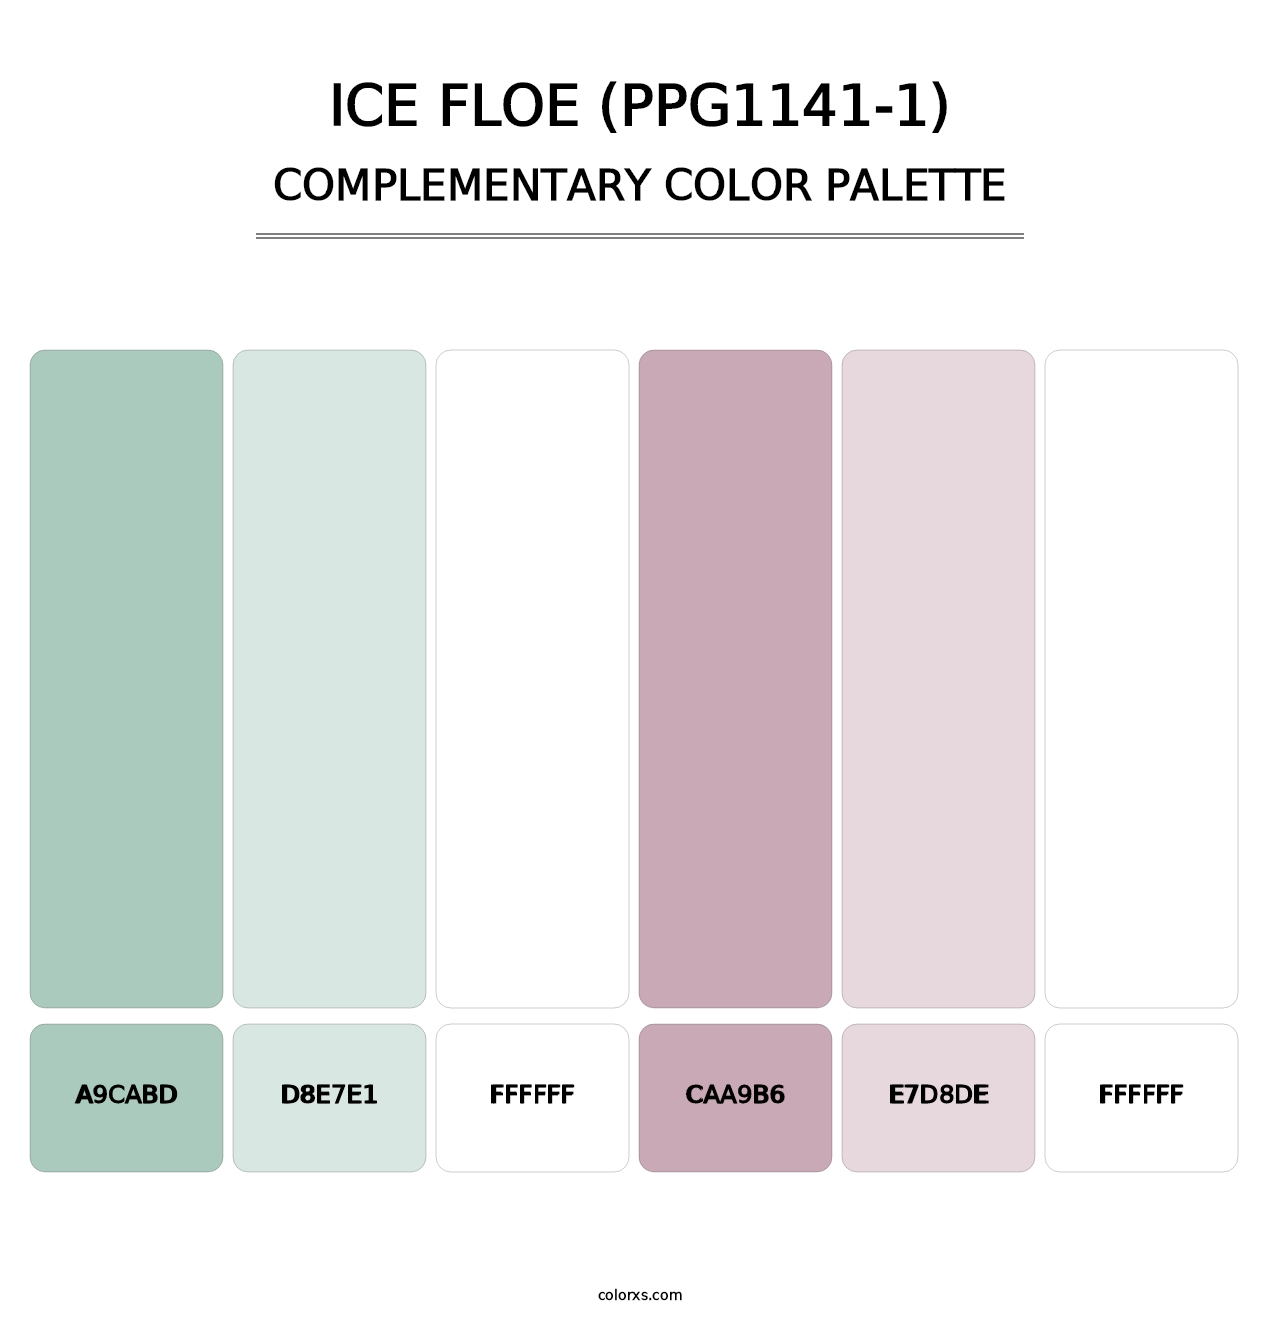 Ice Floe (PPG1141-1) - Complementary Color Palette